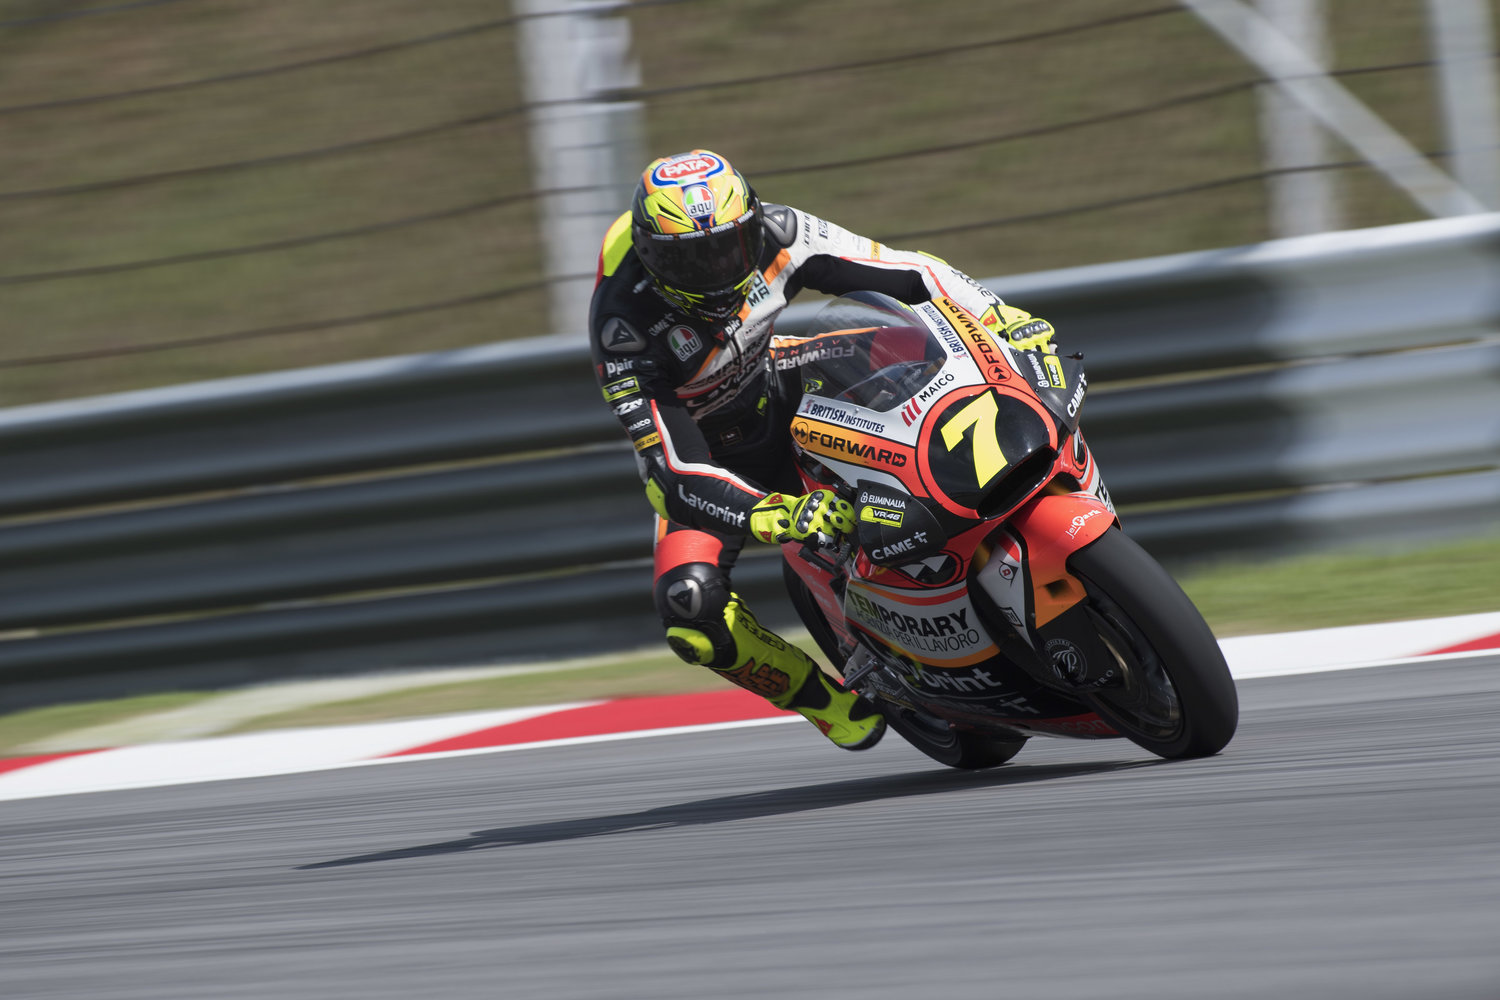 Forward Racing Team duo without luck in Malaysia